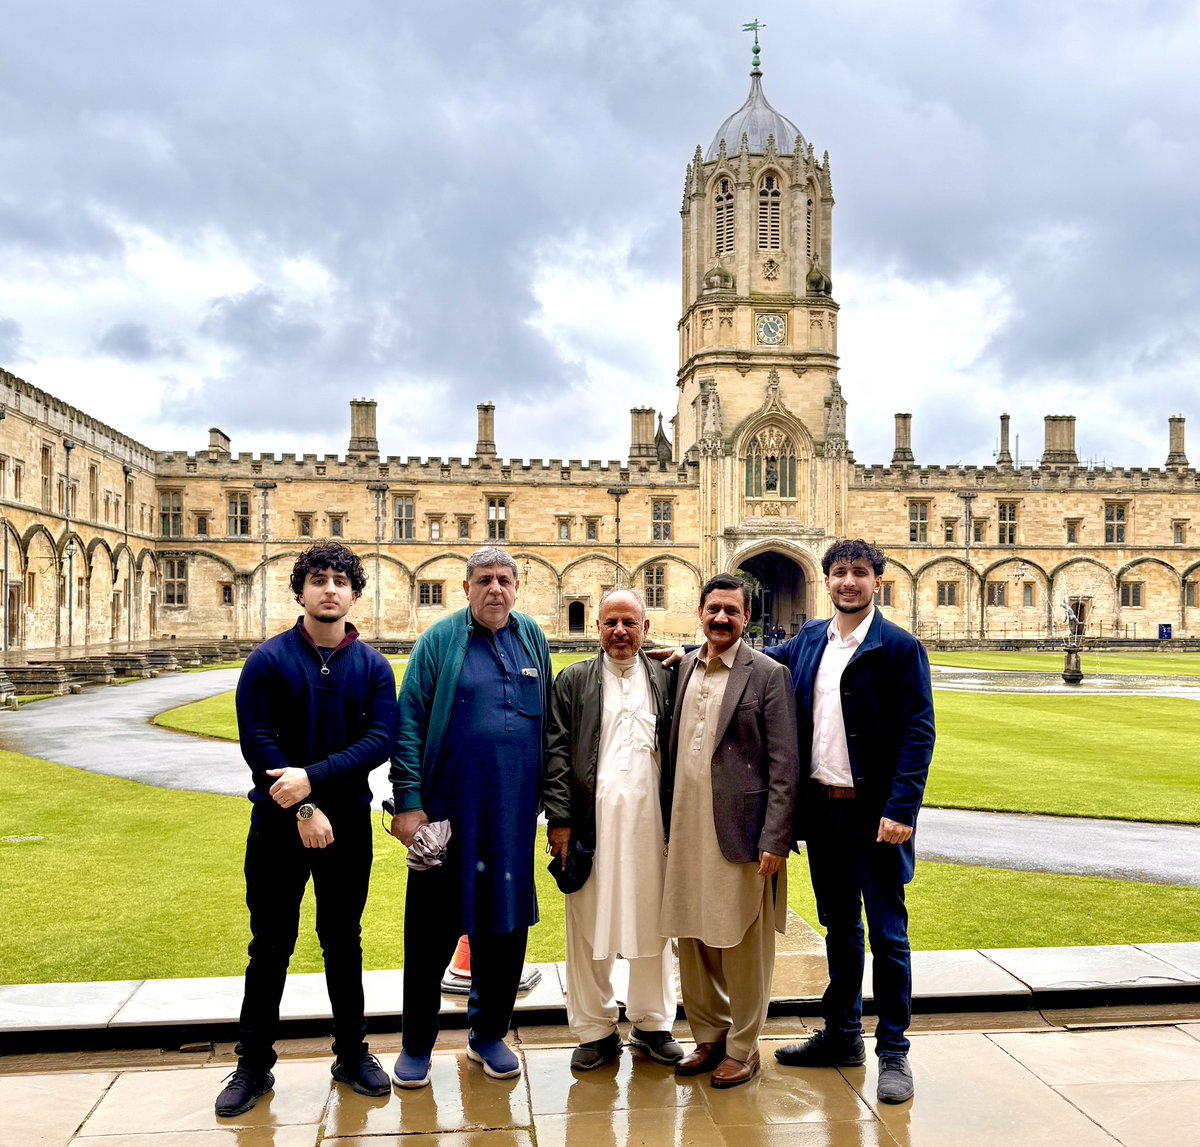 Wonderful day spent with @ZiauddinY, who took time out of his busy day to show us around @UniofOxford.